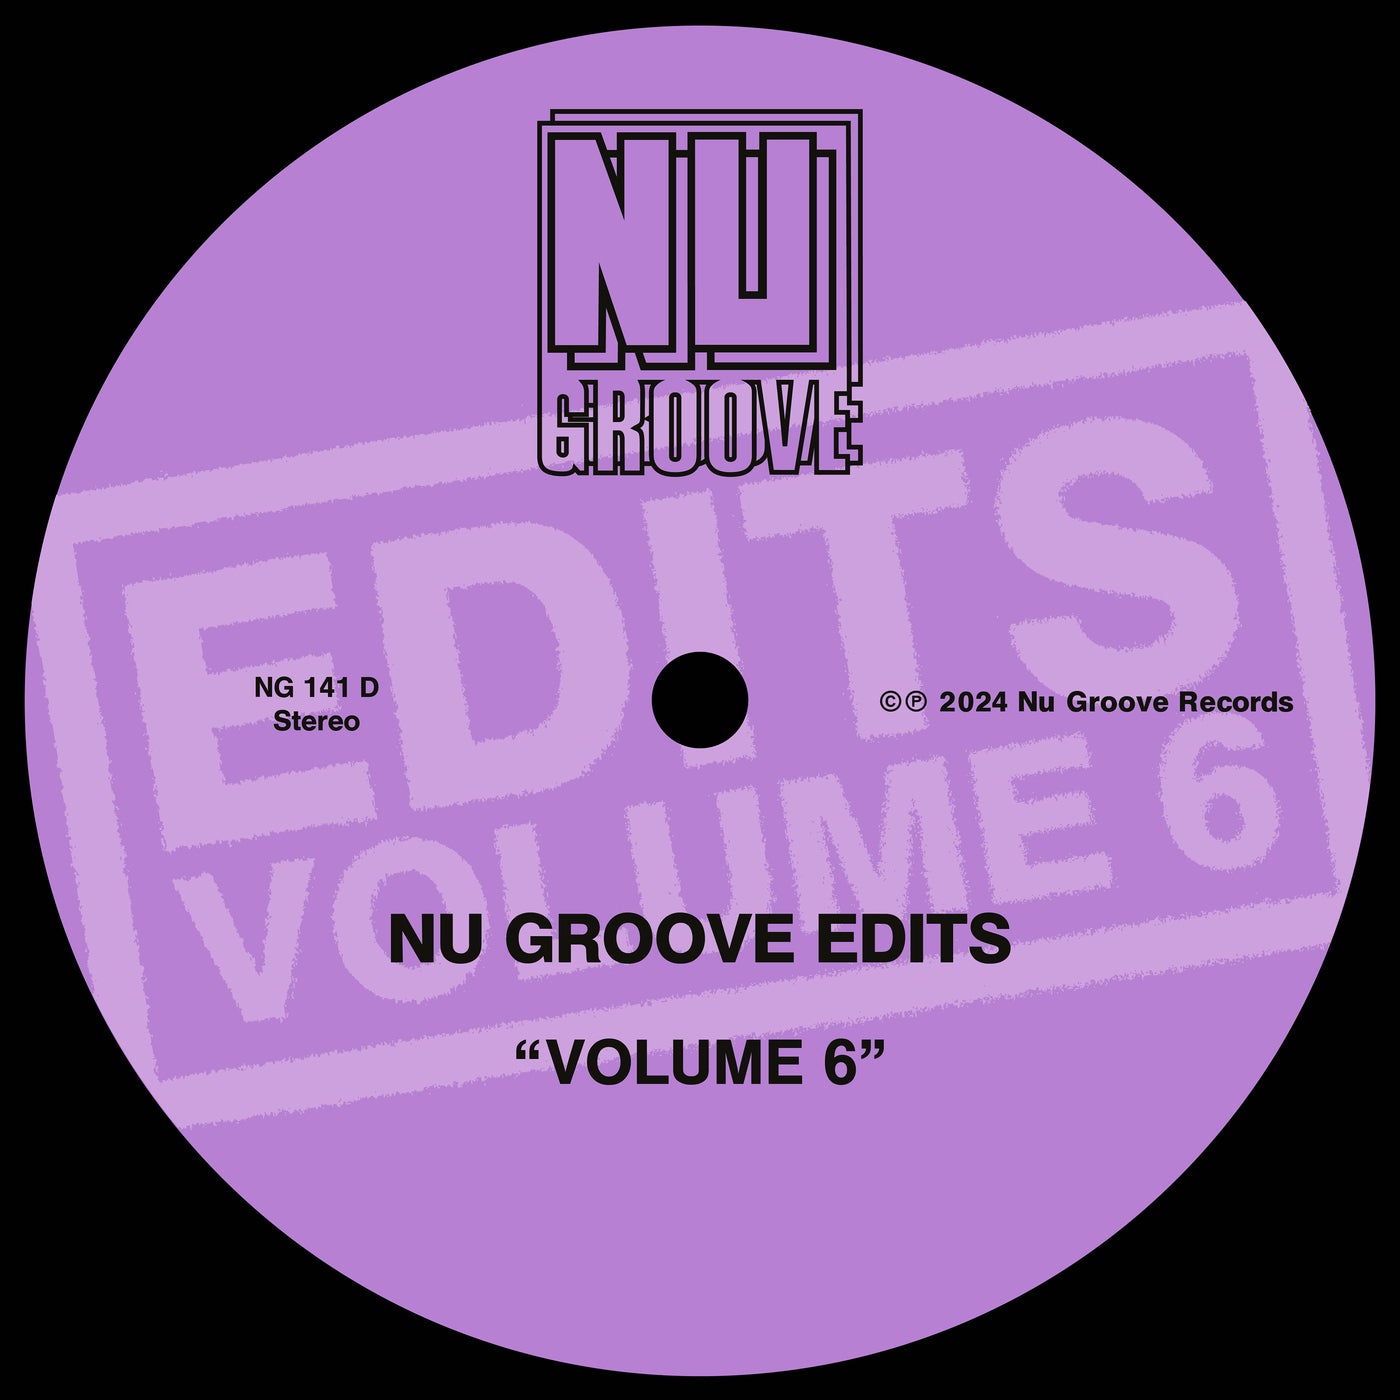 image cover: VA - Nu Groove Edits, Vol. 6 on Nu Groove Records